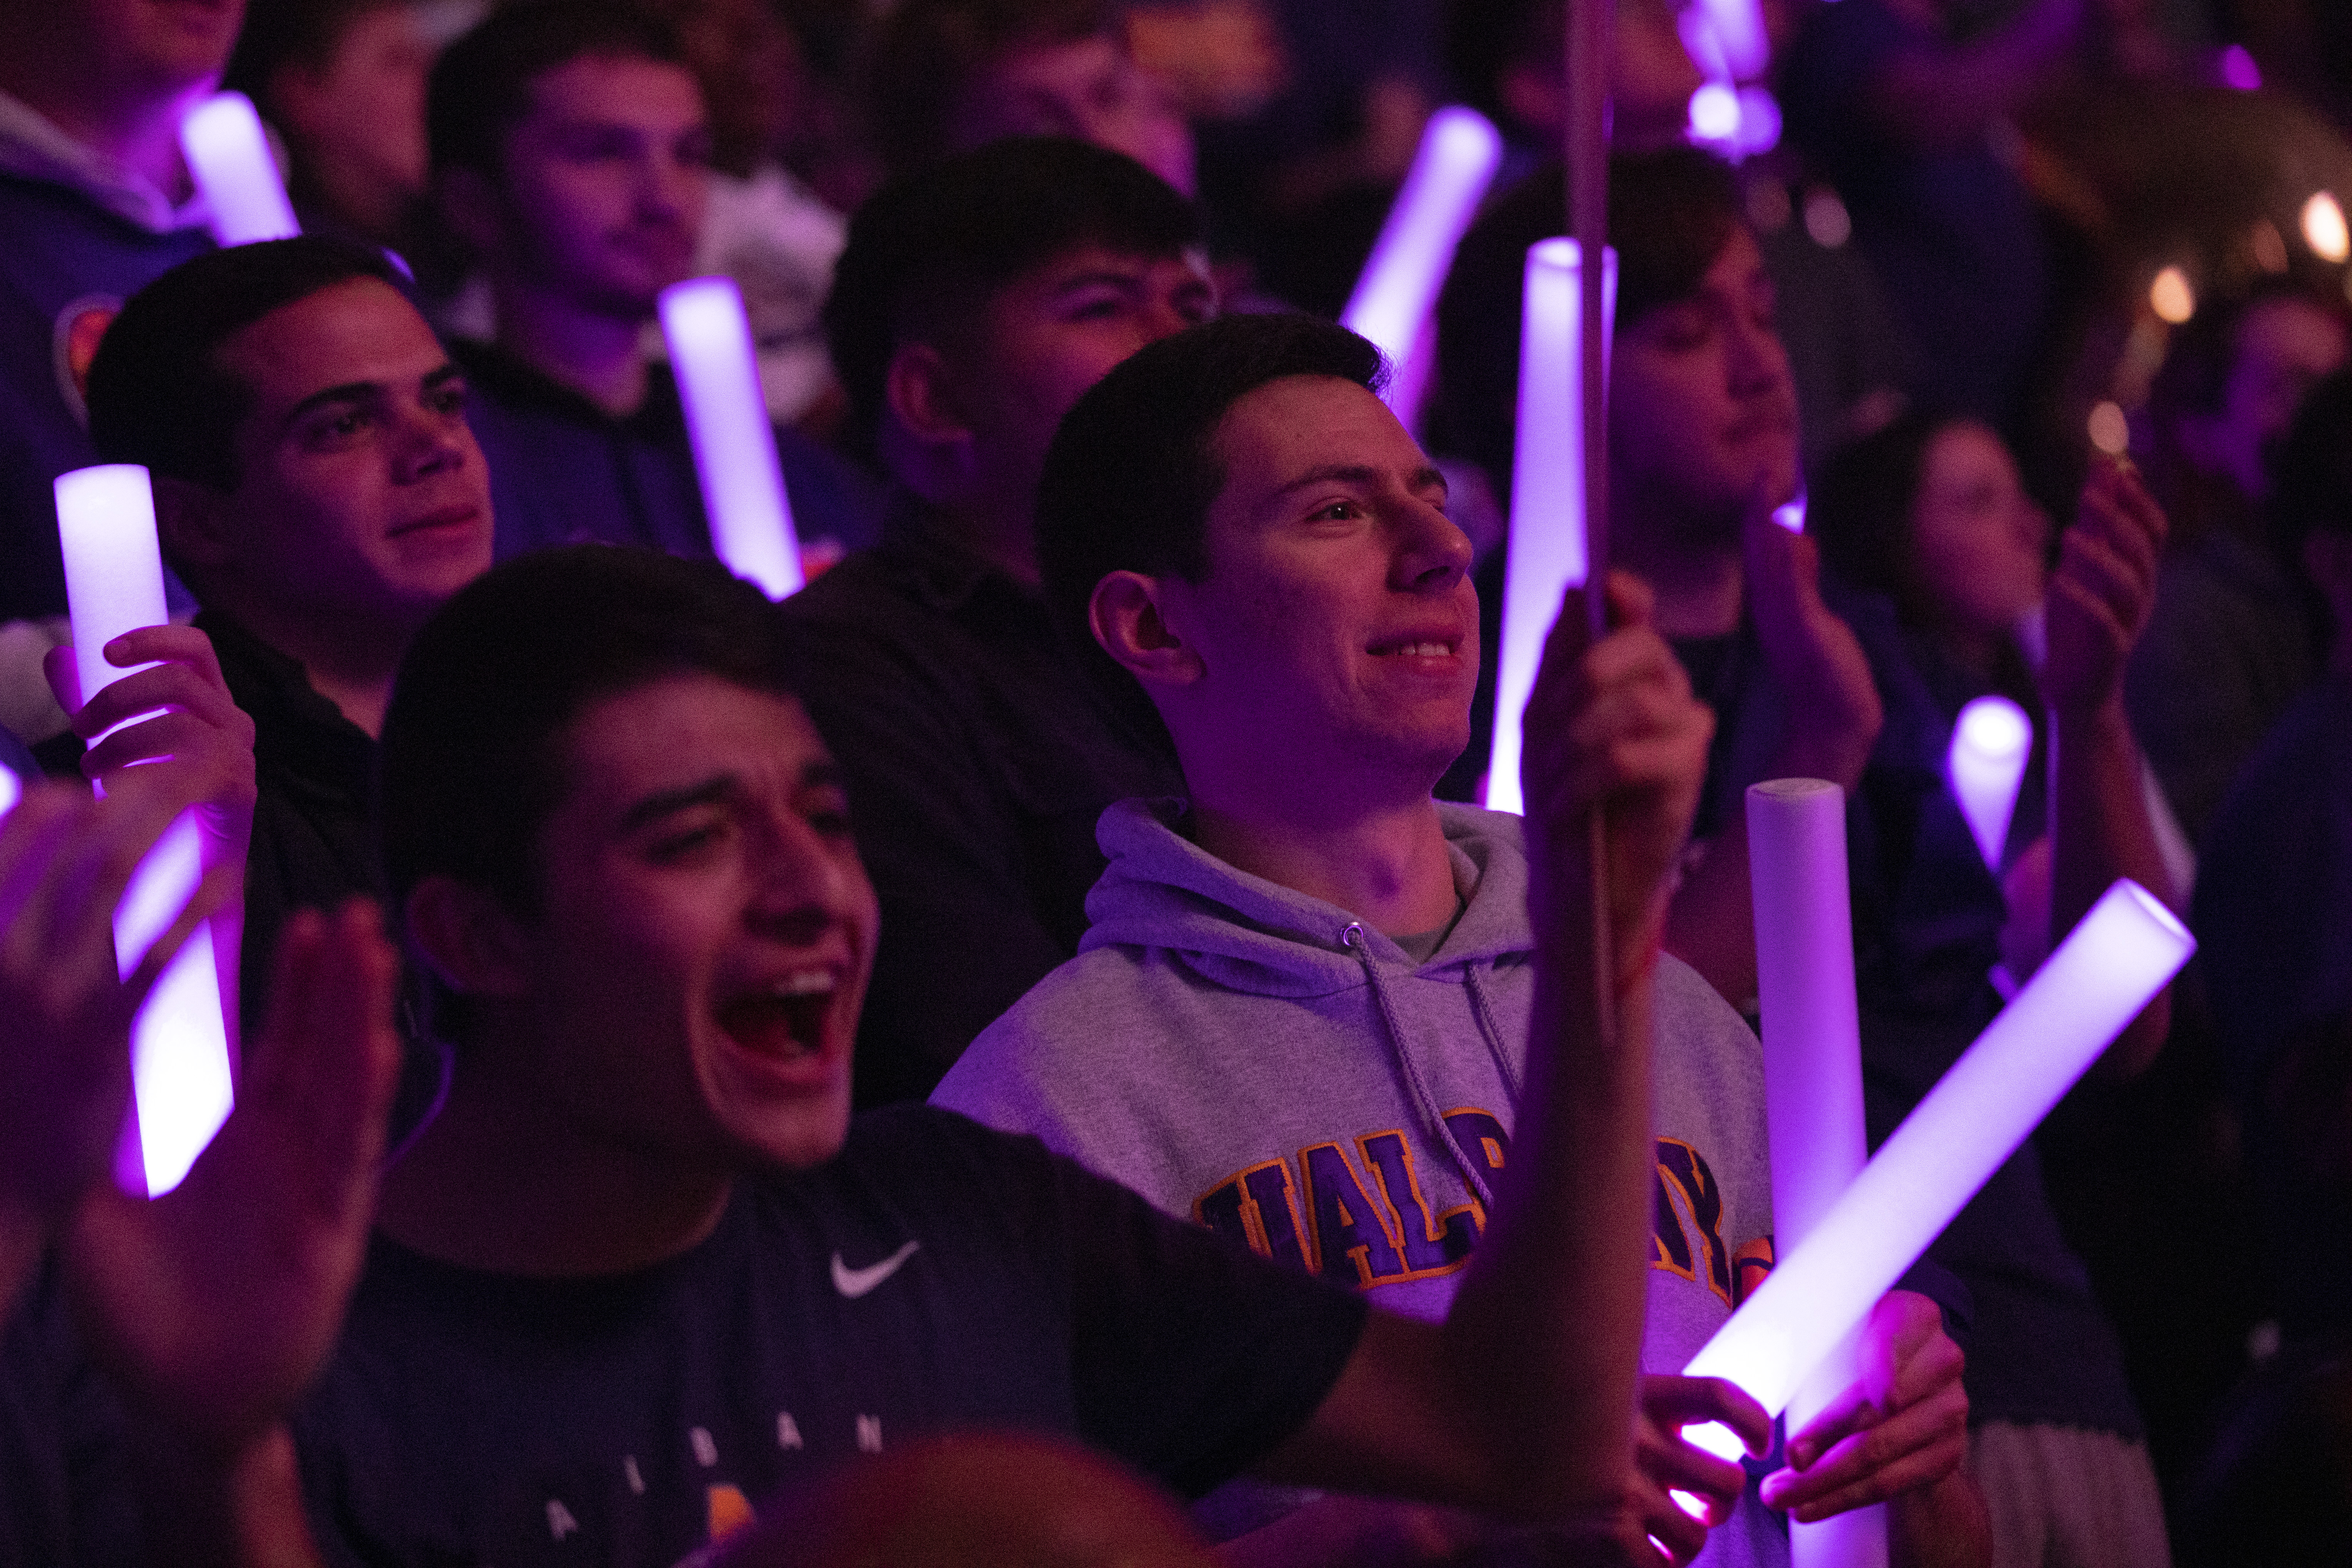 Students hold purple glow sticks as they stand and cheer for a UAlbany team